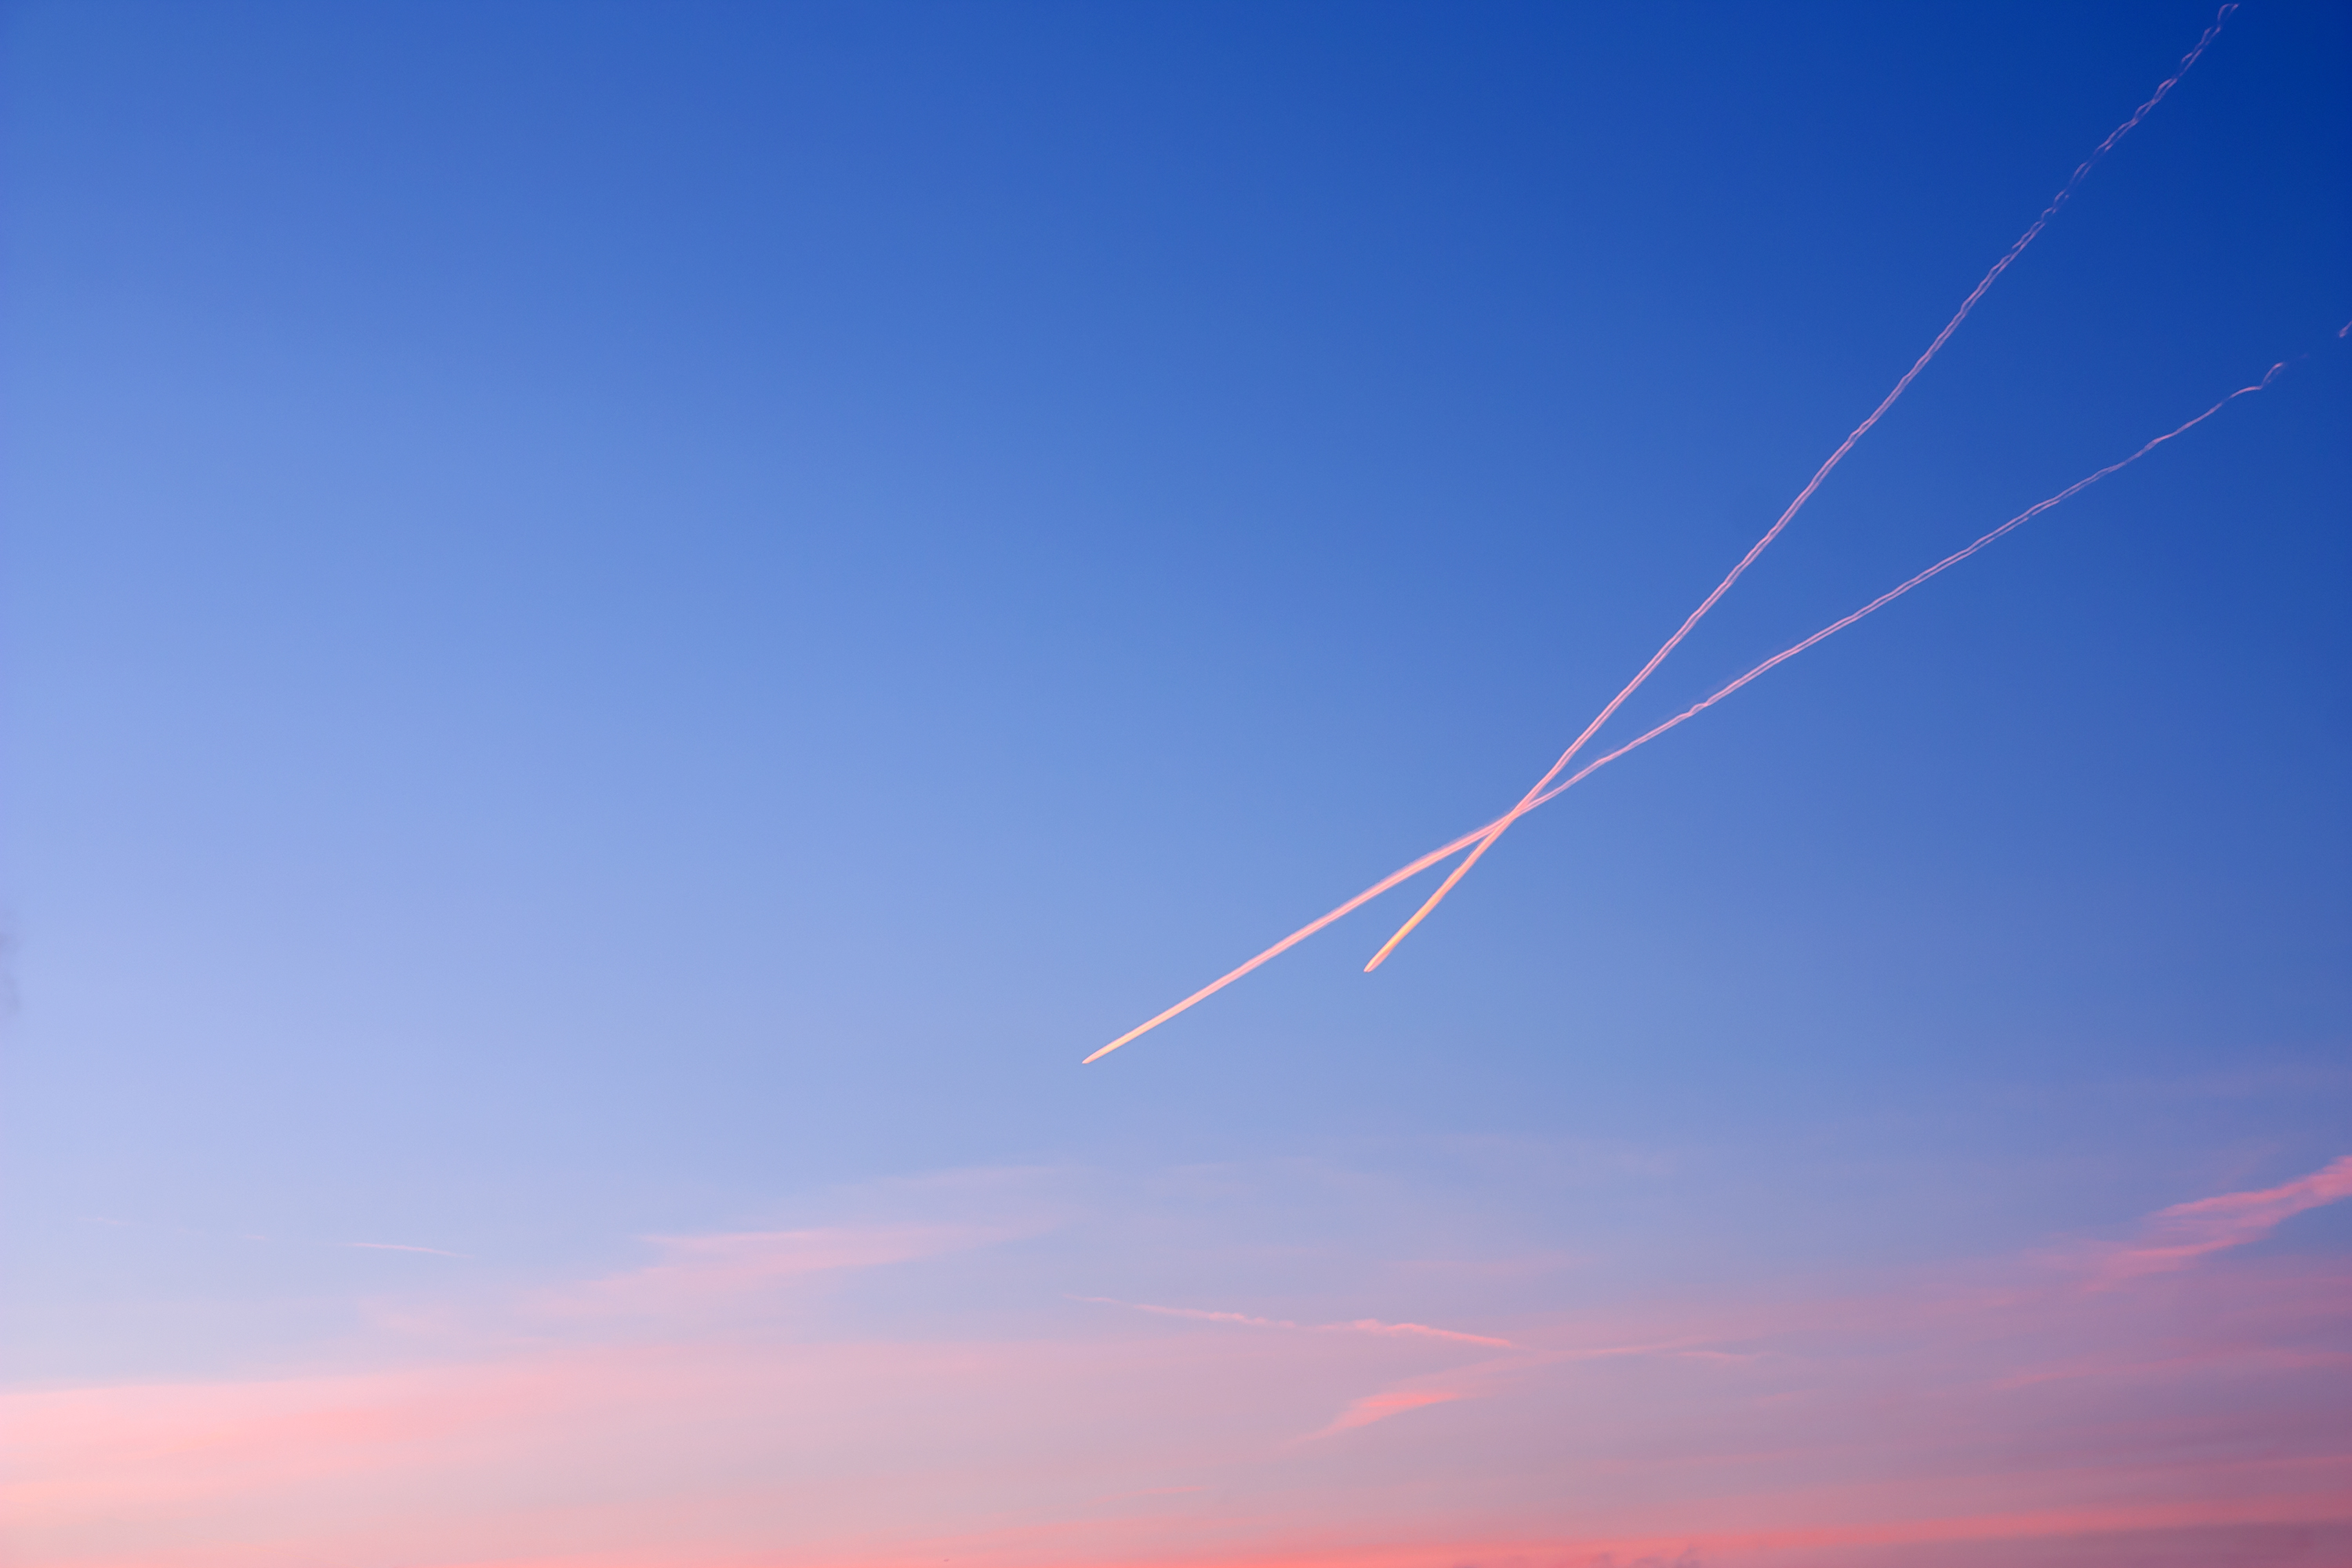 Contrails in the sky at sunset